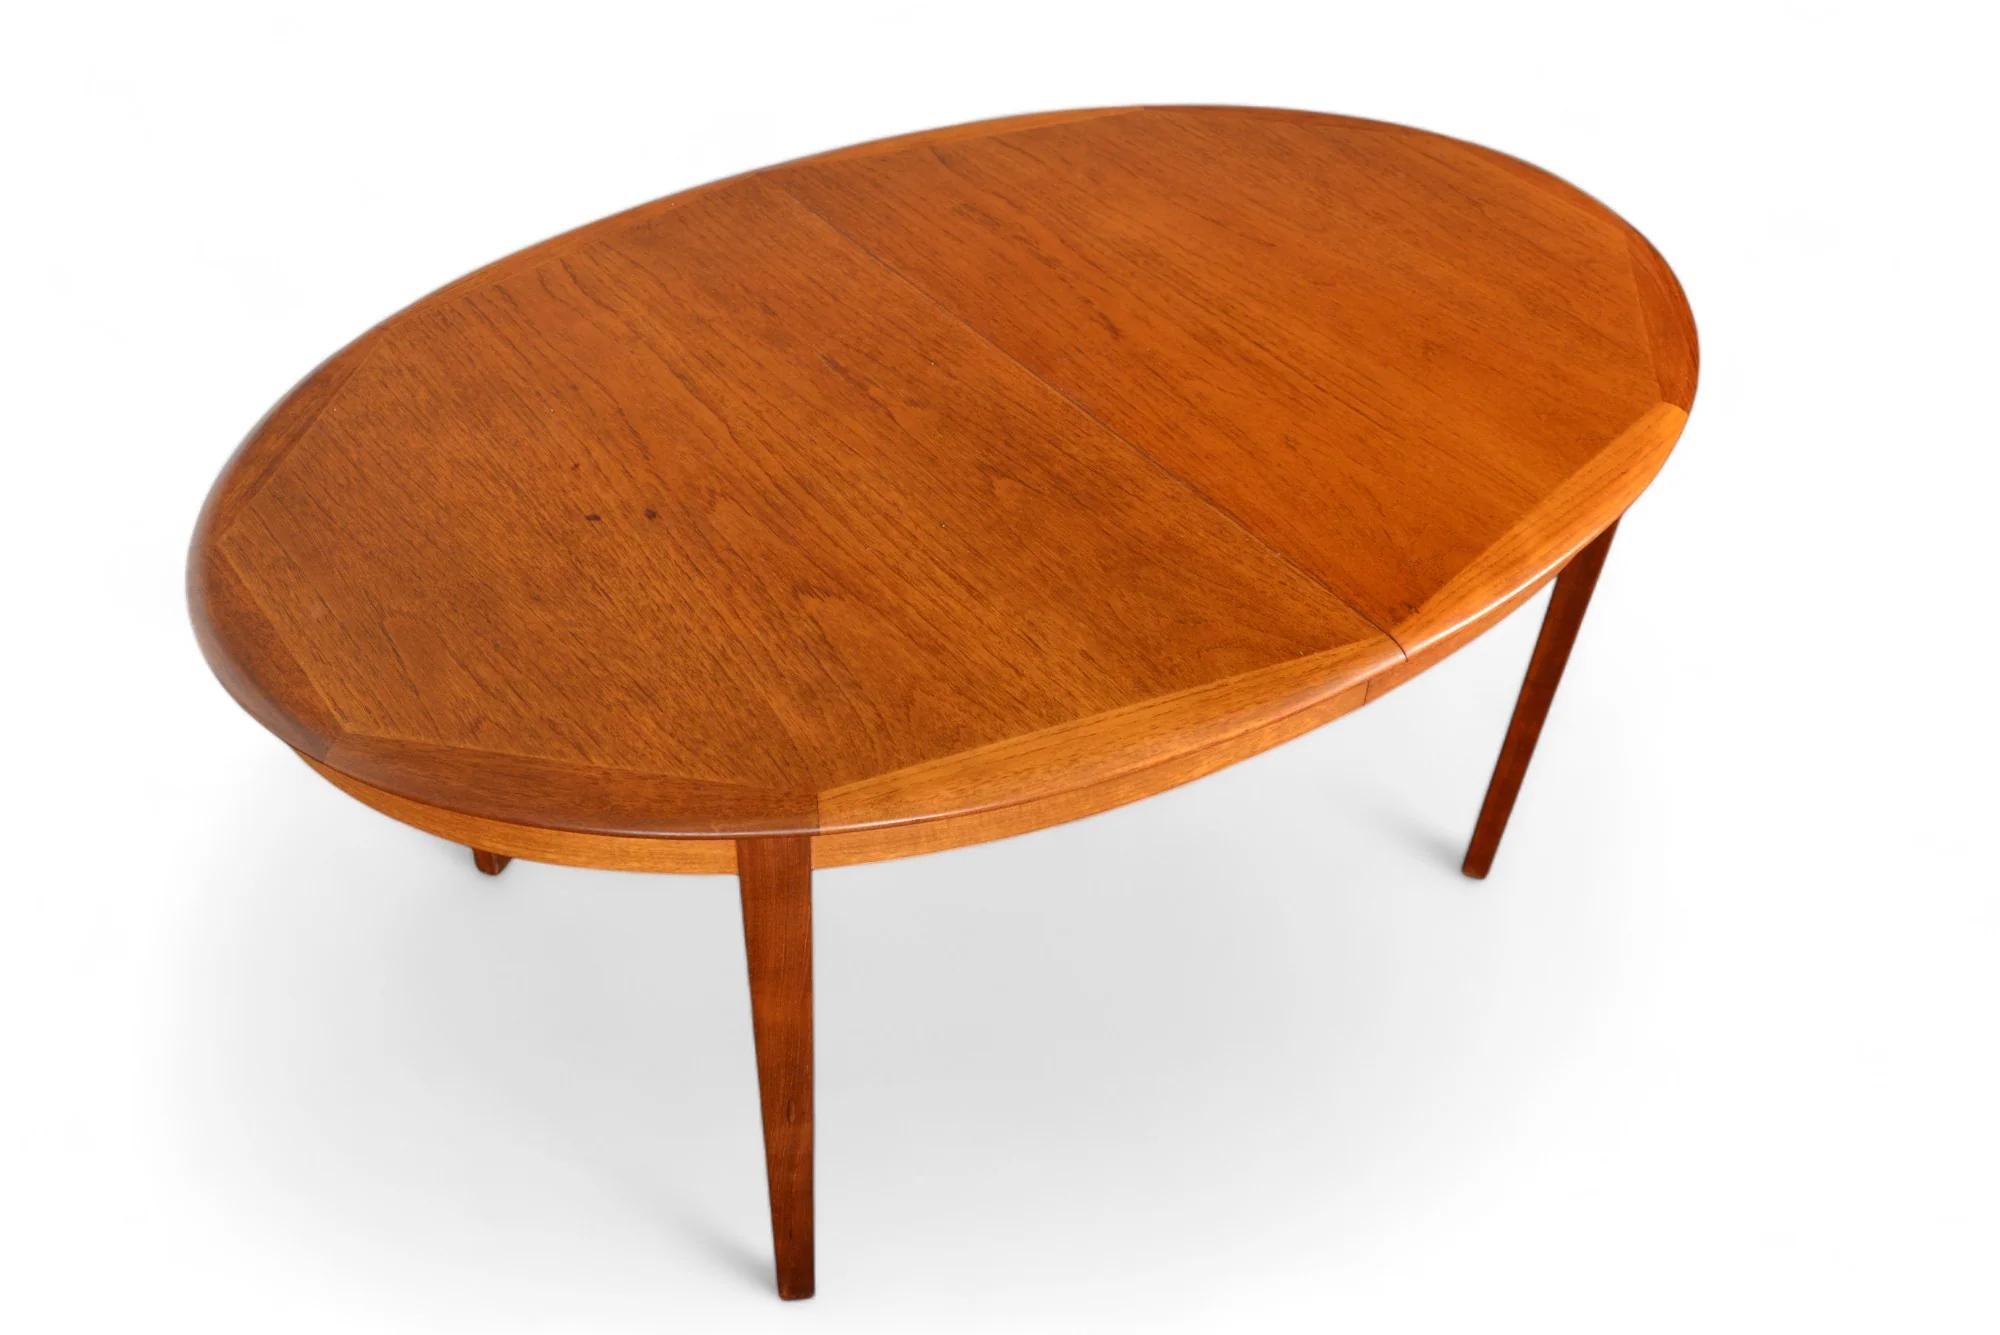 Danish Modern Oval Teak Dining Table + Two Leaves By Byrlund In Good Condition For Sale In Berkeley, CA